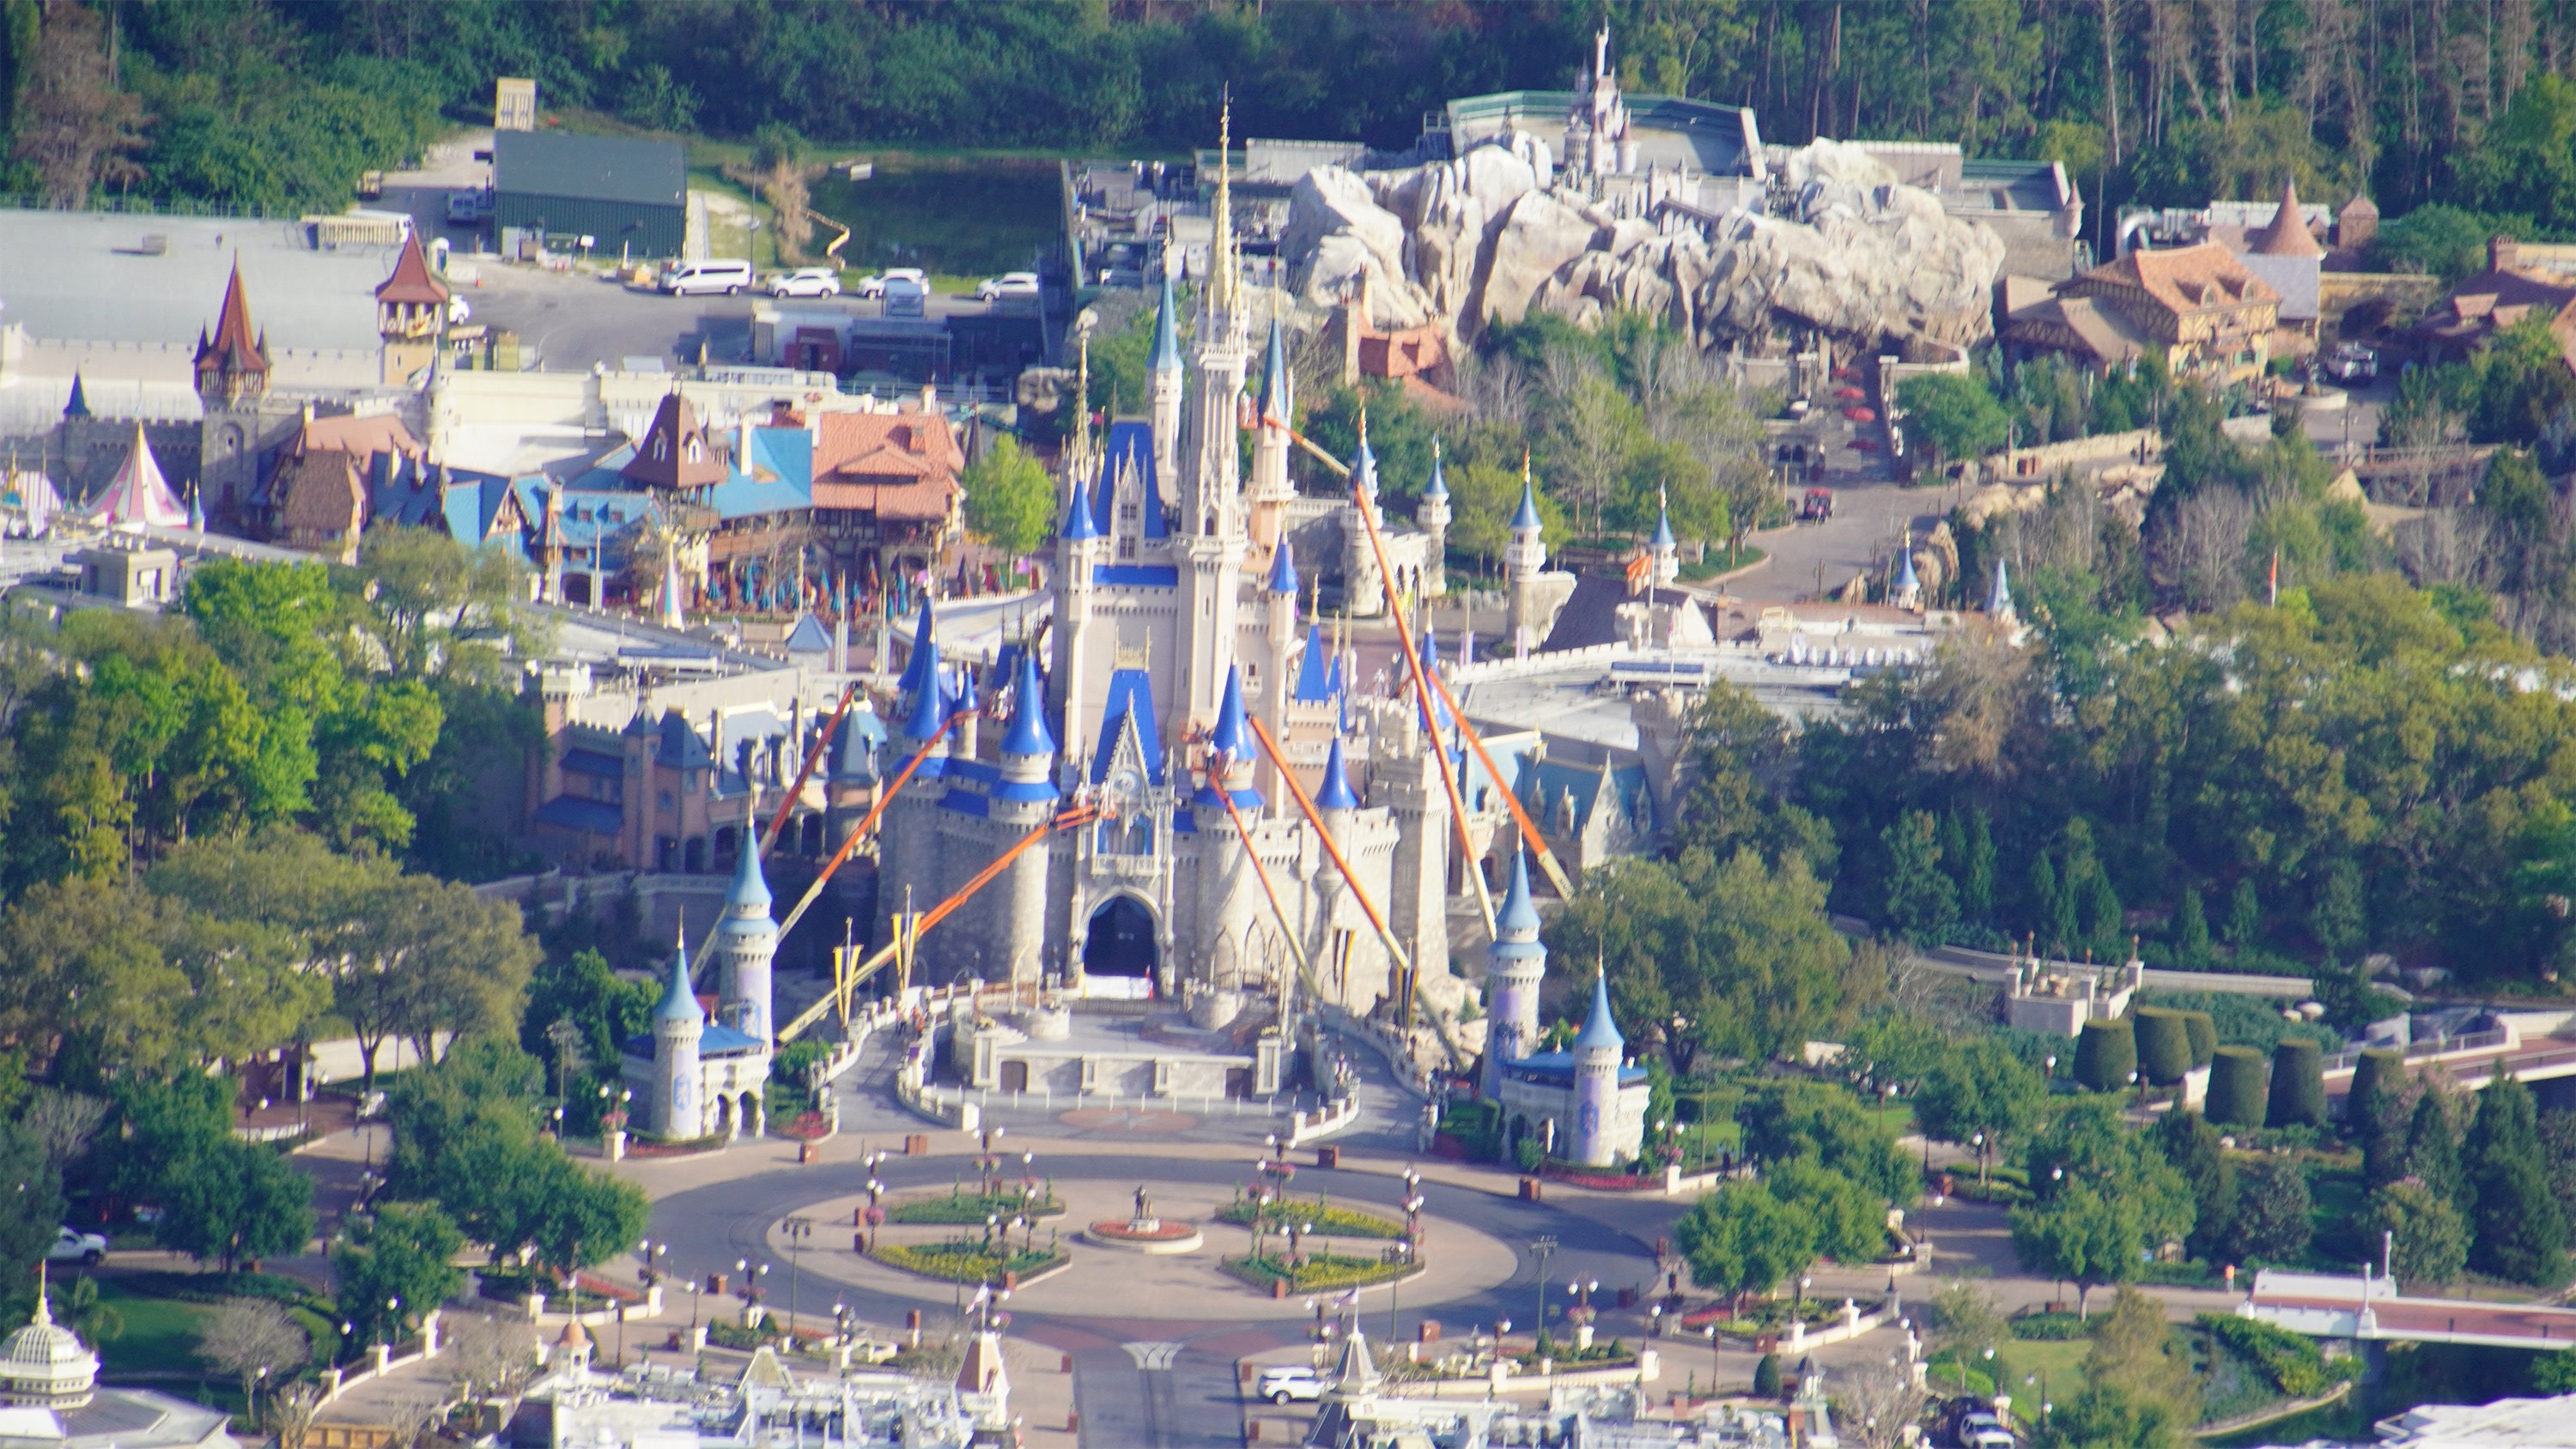 PHOTOS Aerial Images of a Empty Magic Kingdom, EPCOT, and More as Walt